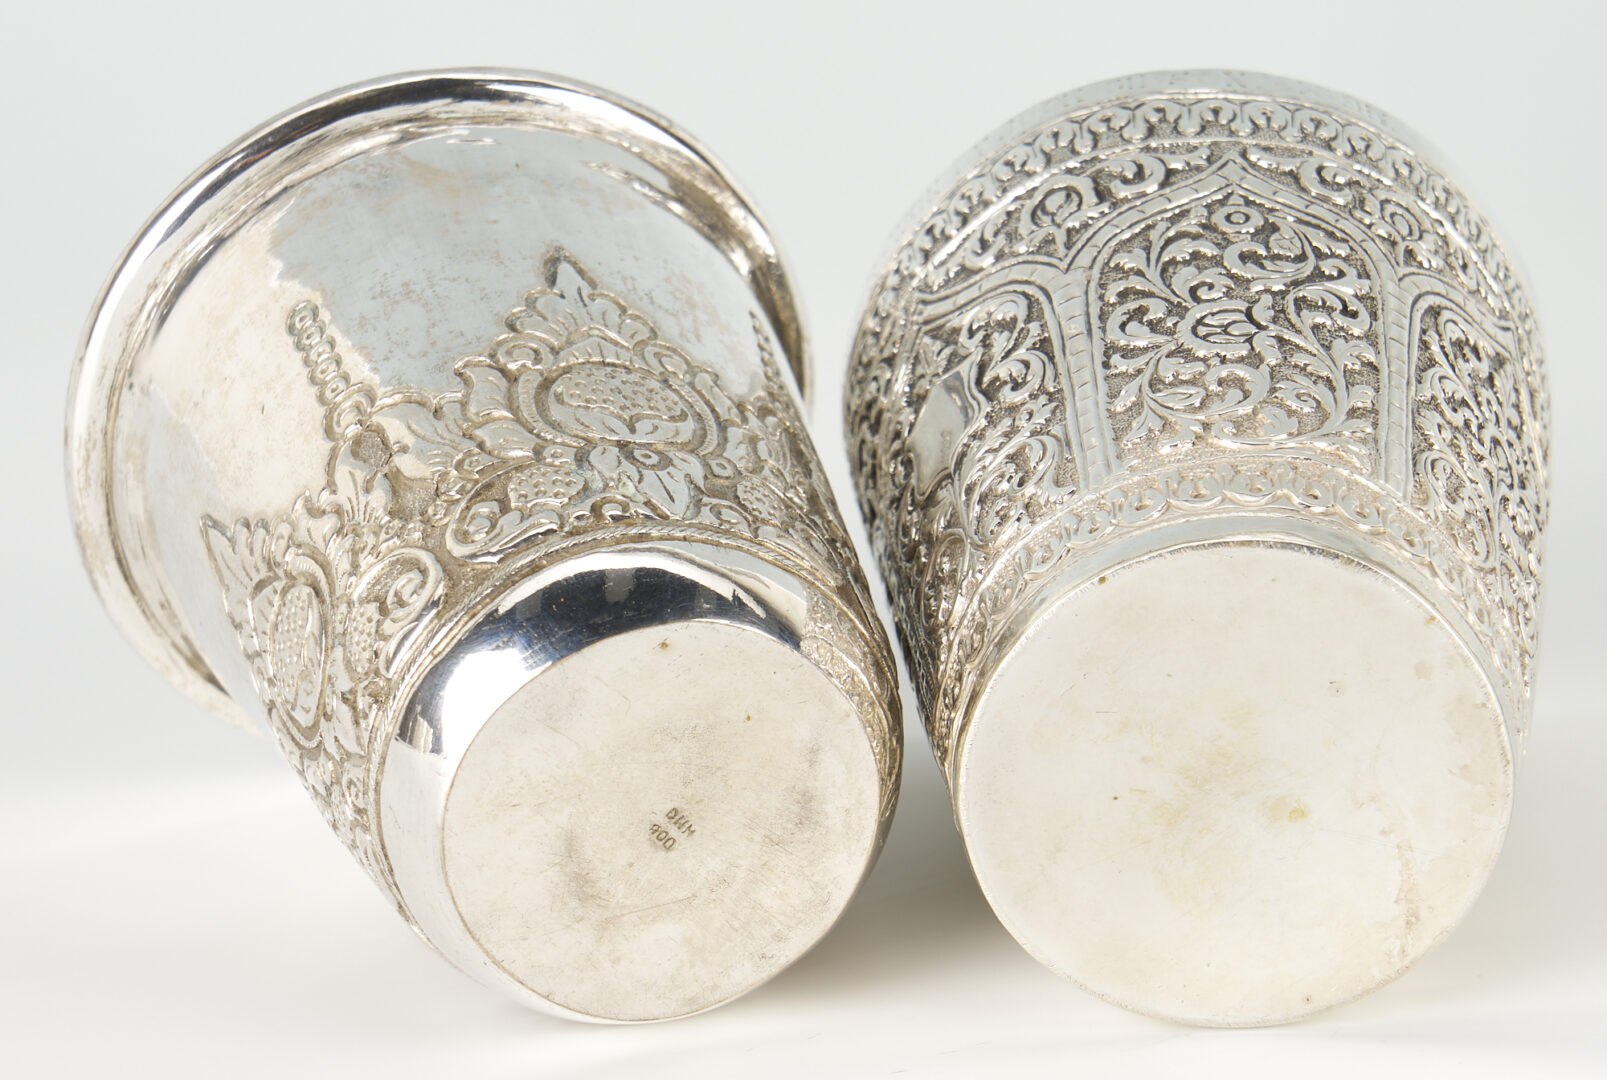 Lot 2: 4 Asian silver cups including Rifle Presentation Trophy Cup